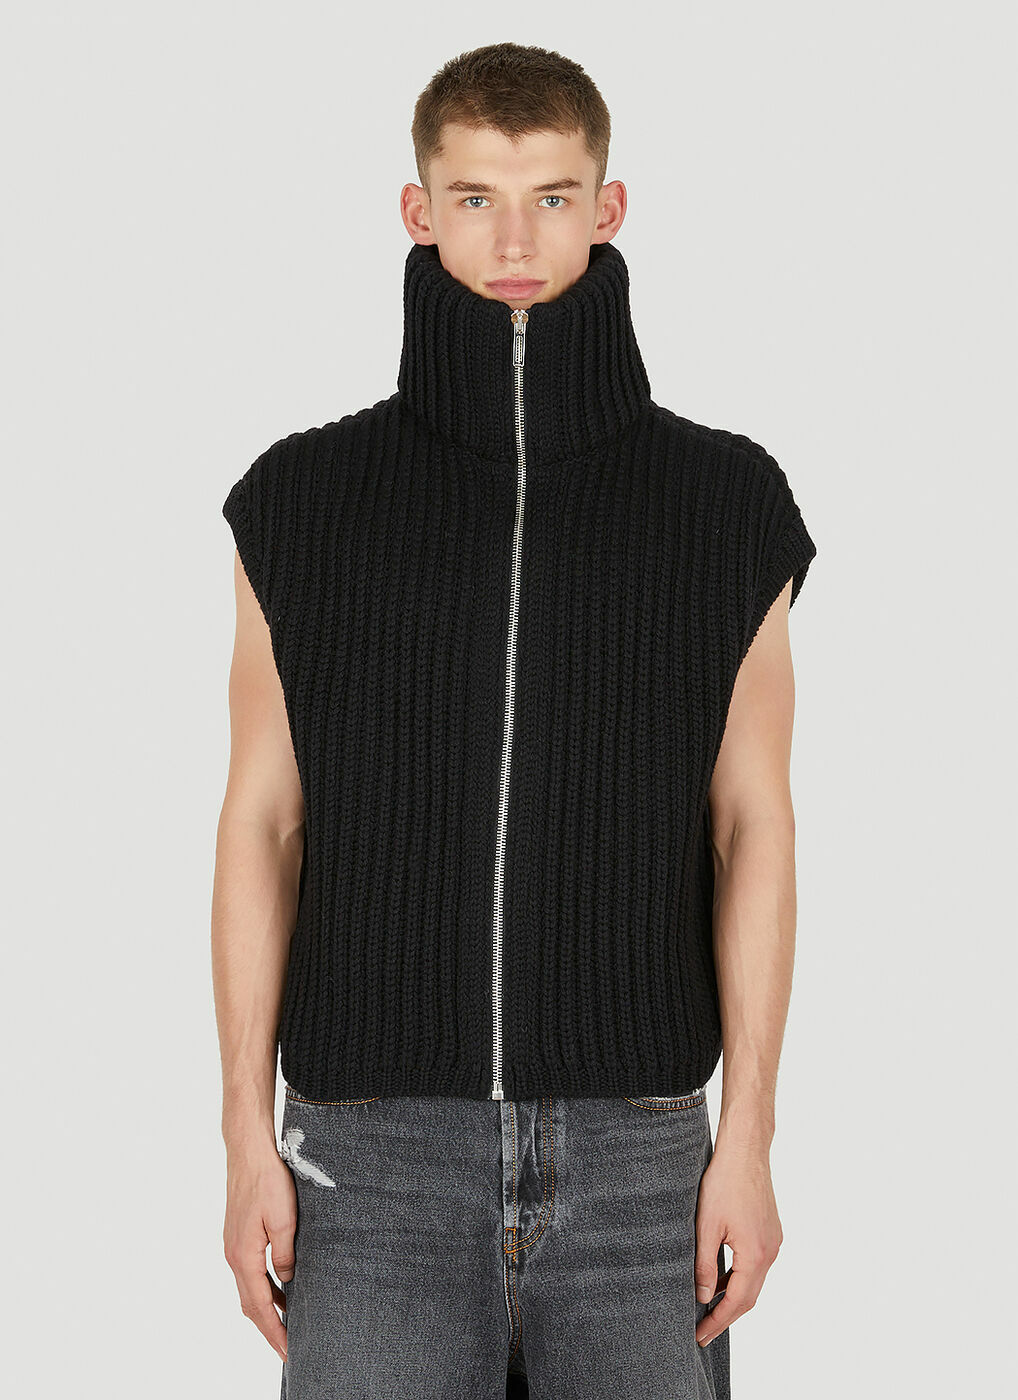 Ribbed Knit Sleeveless Sweater in Black